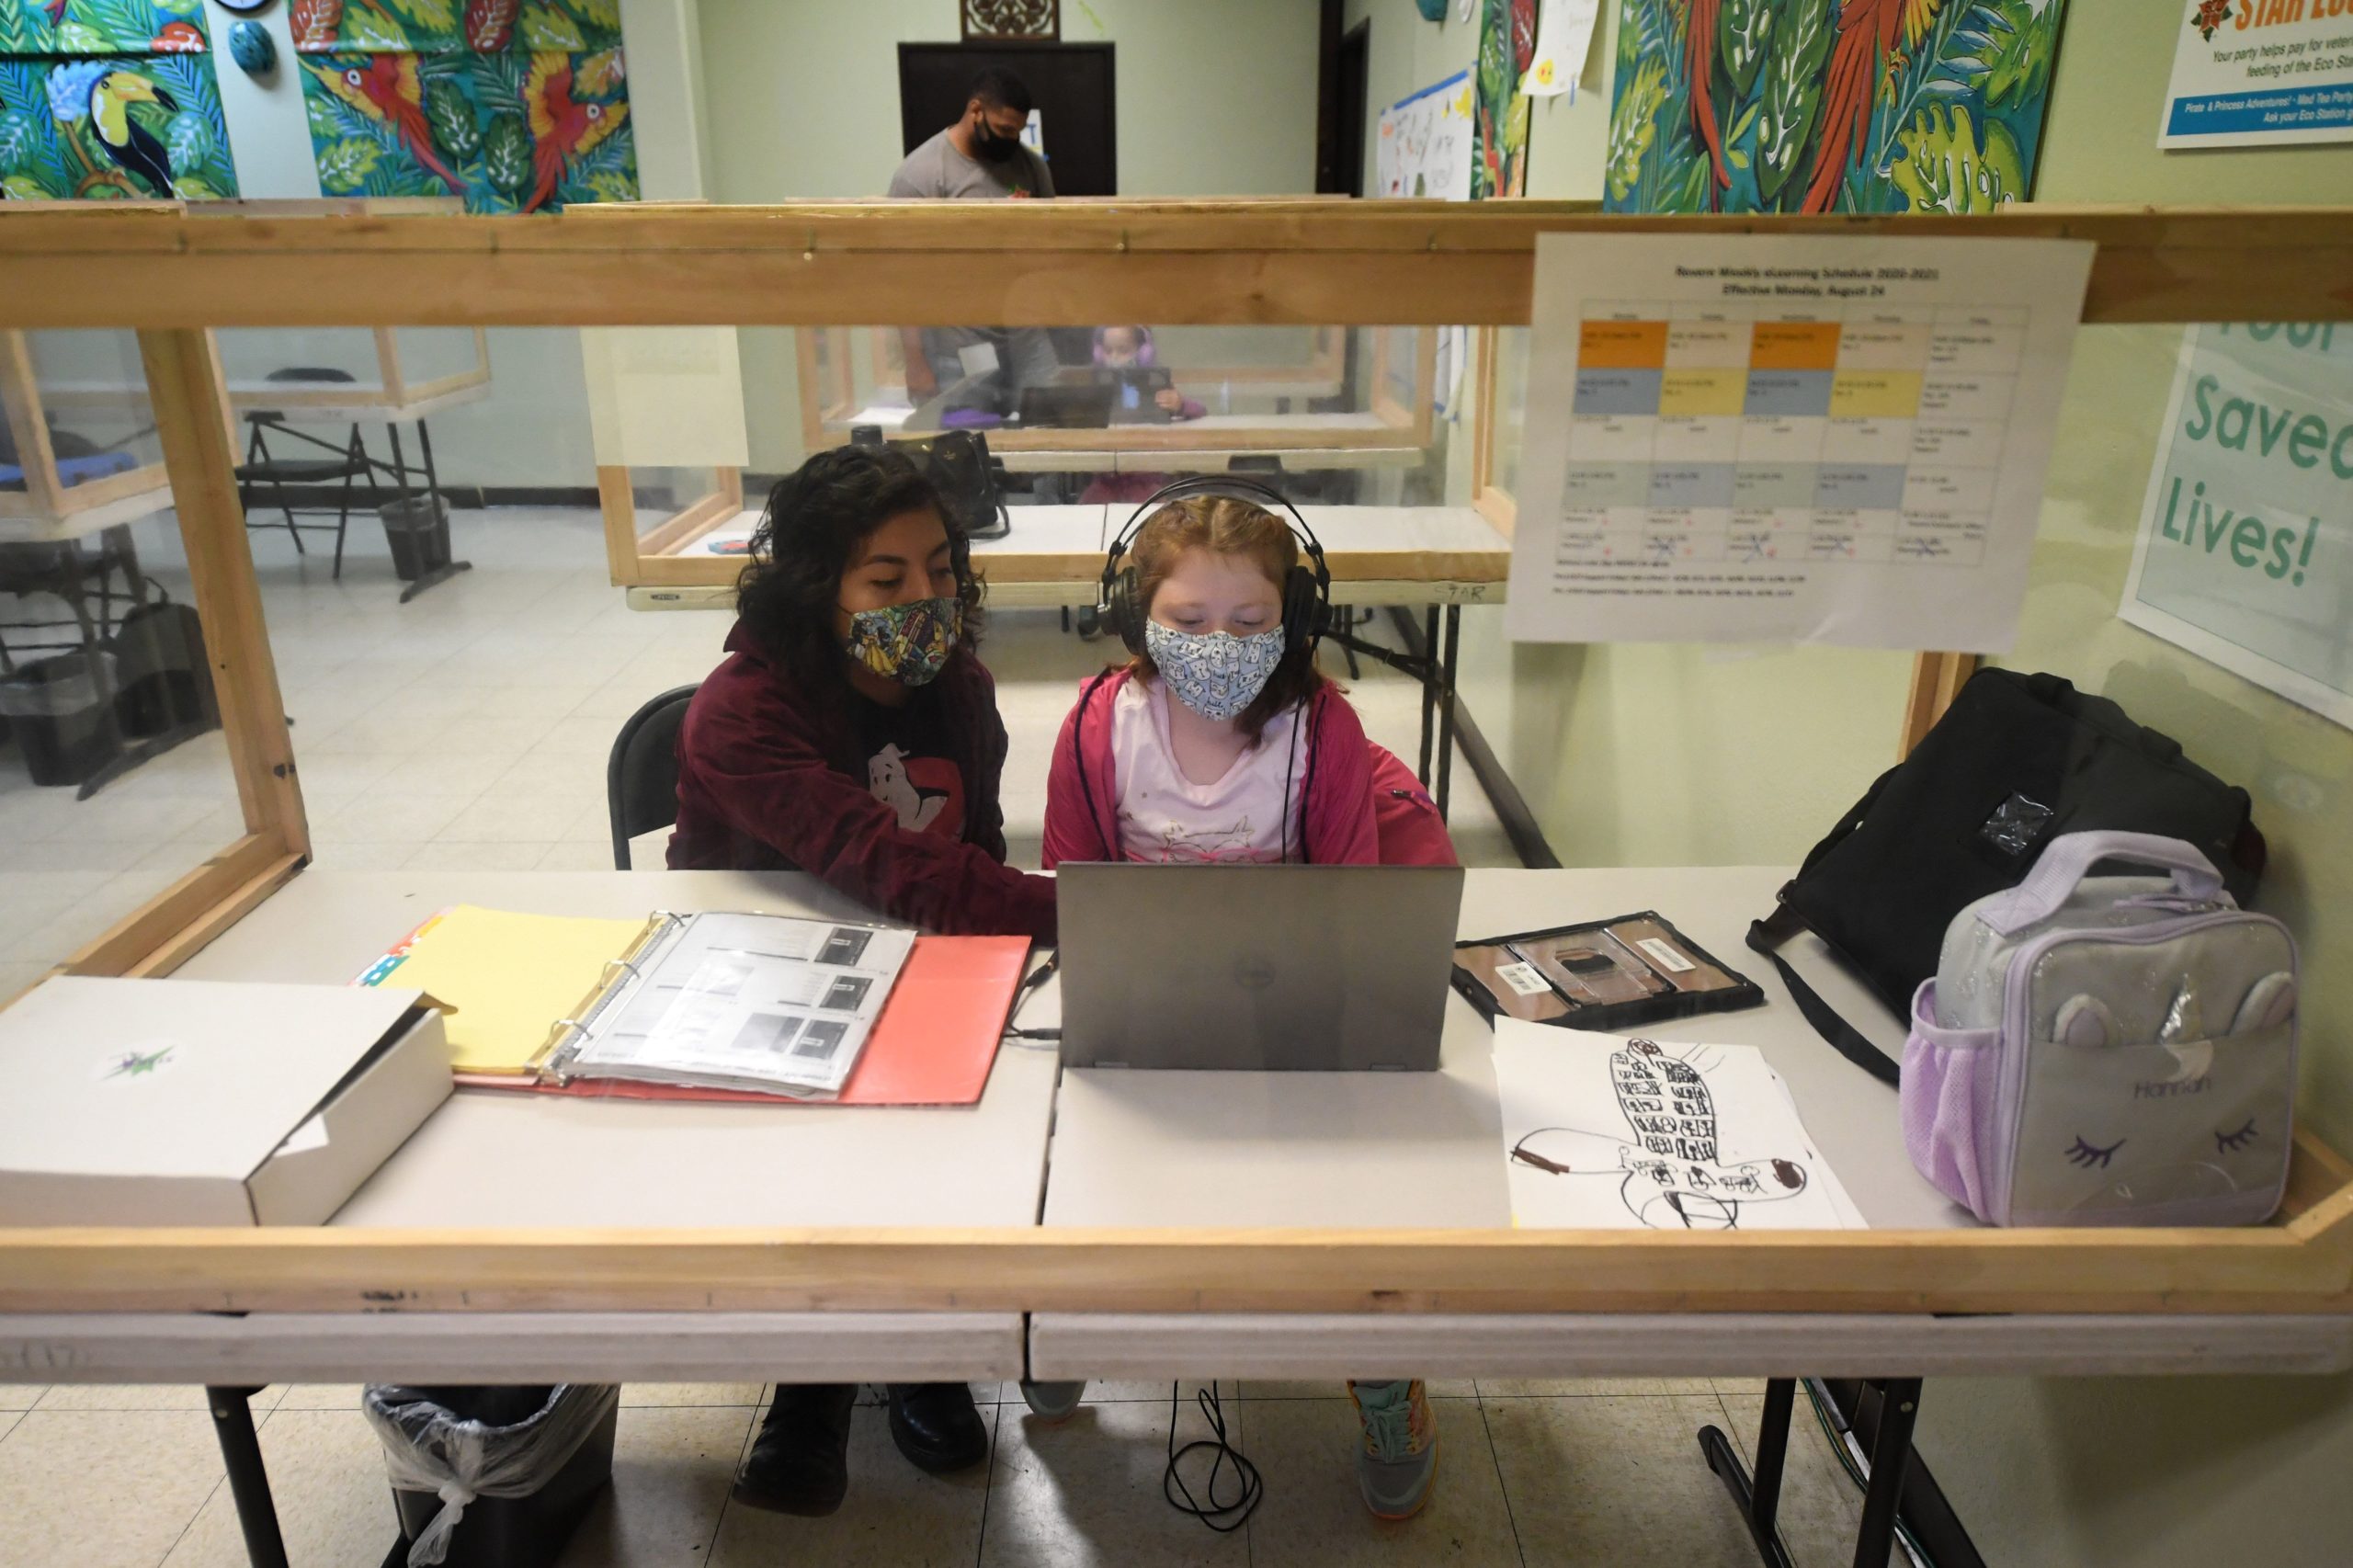 An instructor (L) helps a student with her online school lesson at a desk separated from others by plastic barriers at STAR Eco Station Tutoring & Enrichment Center on September 10, 2020 in Culver City, California. - California public school students will continue to learn at home, in private learning pods, or at specialized enrichment centers like Star Eco Station as the coronavirus pandemic continues, after a lawsuit brought by the Orange County Board of Education seeking to compel the state to reopen public schools was shot down by the California Supreme Court on September 10. (Photo by Robyn Beck / AFP) (Photo by ROBYN BECK/AFP via Getty Images)